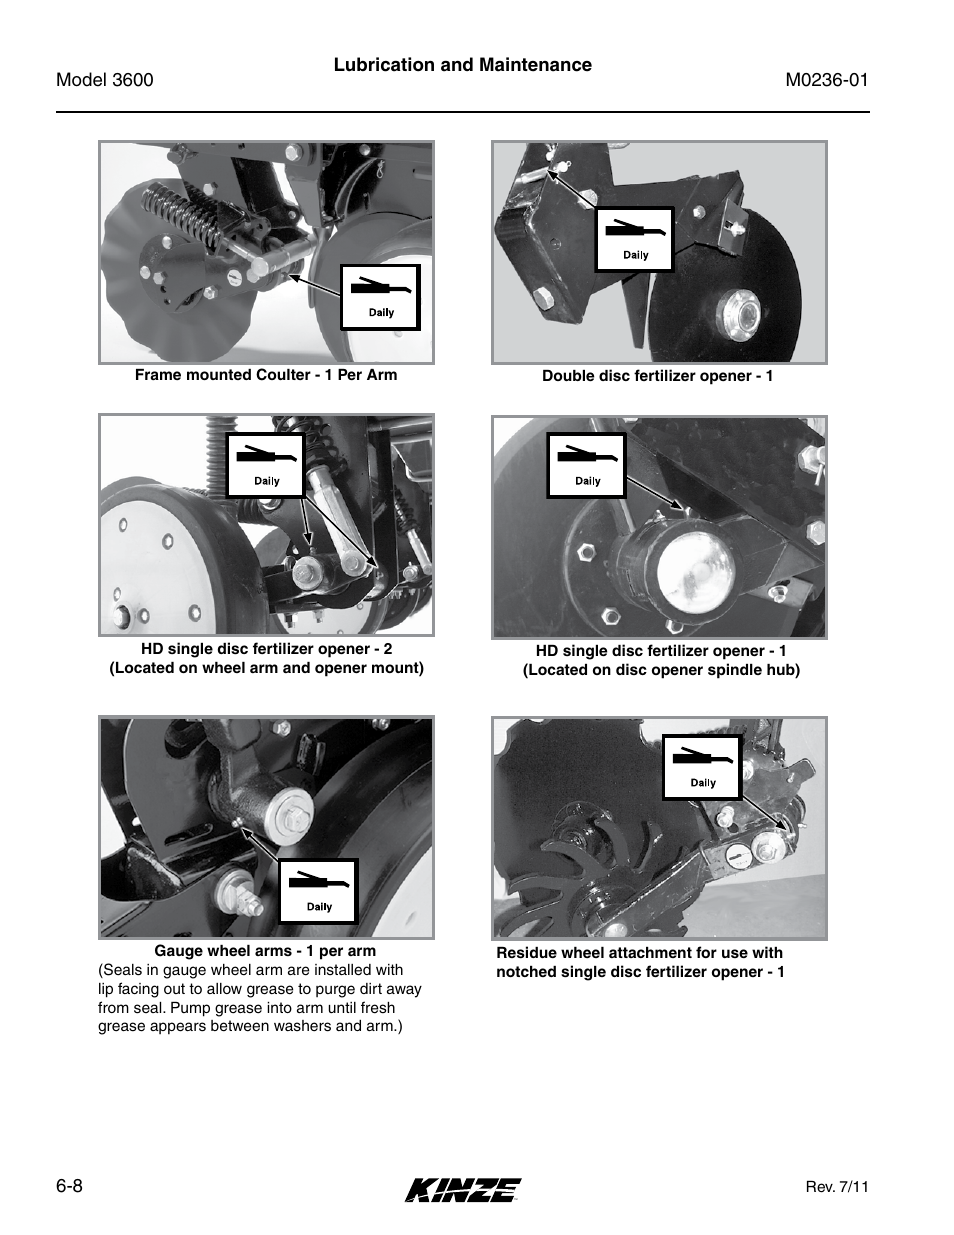 Kinze 3600 Lift and Rotate Planter Rev. 7/14 User Manual | Page 116 / 172